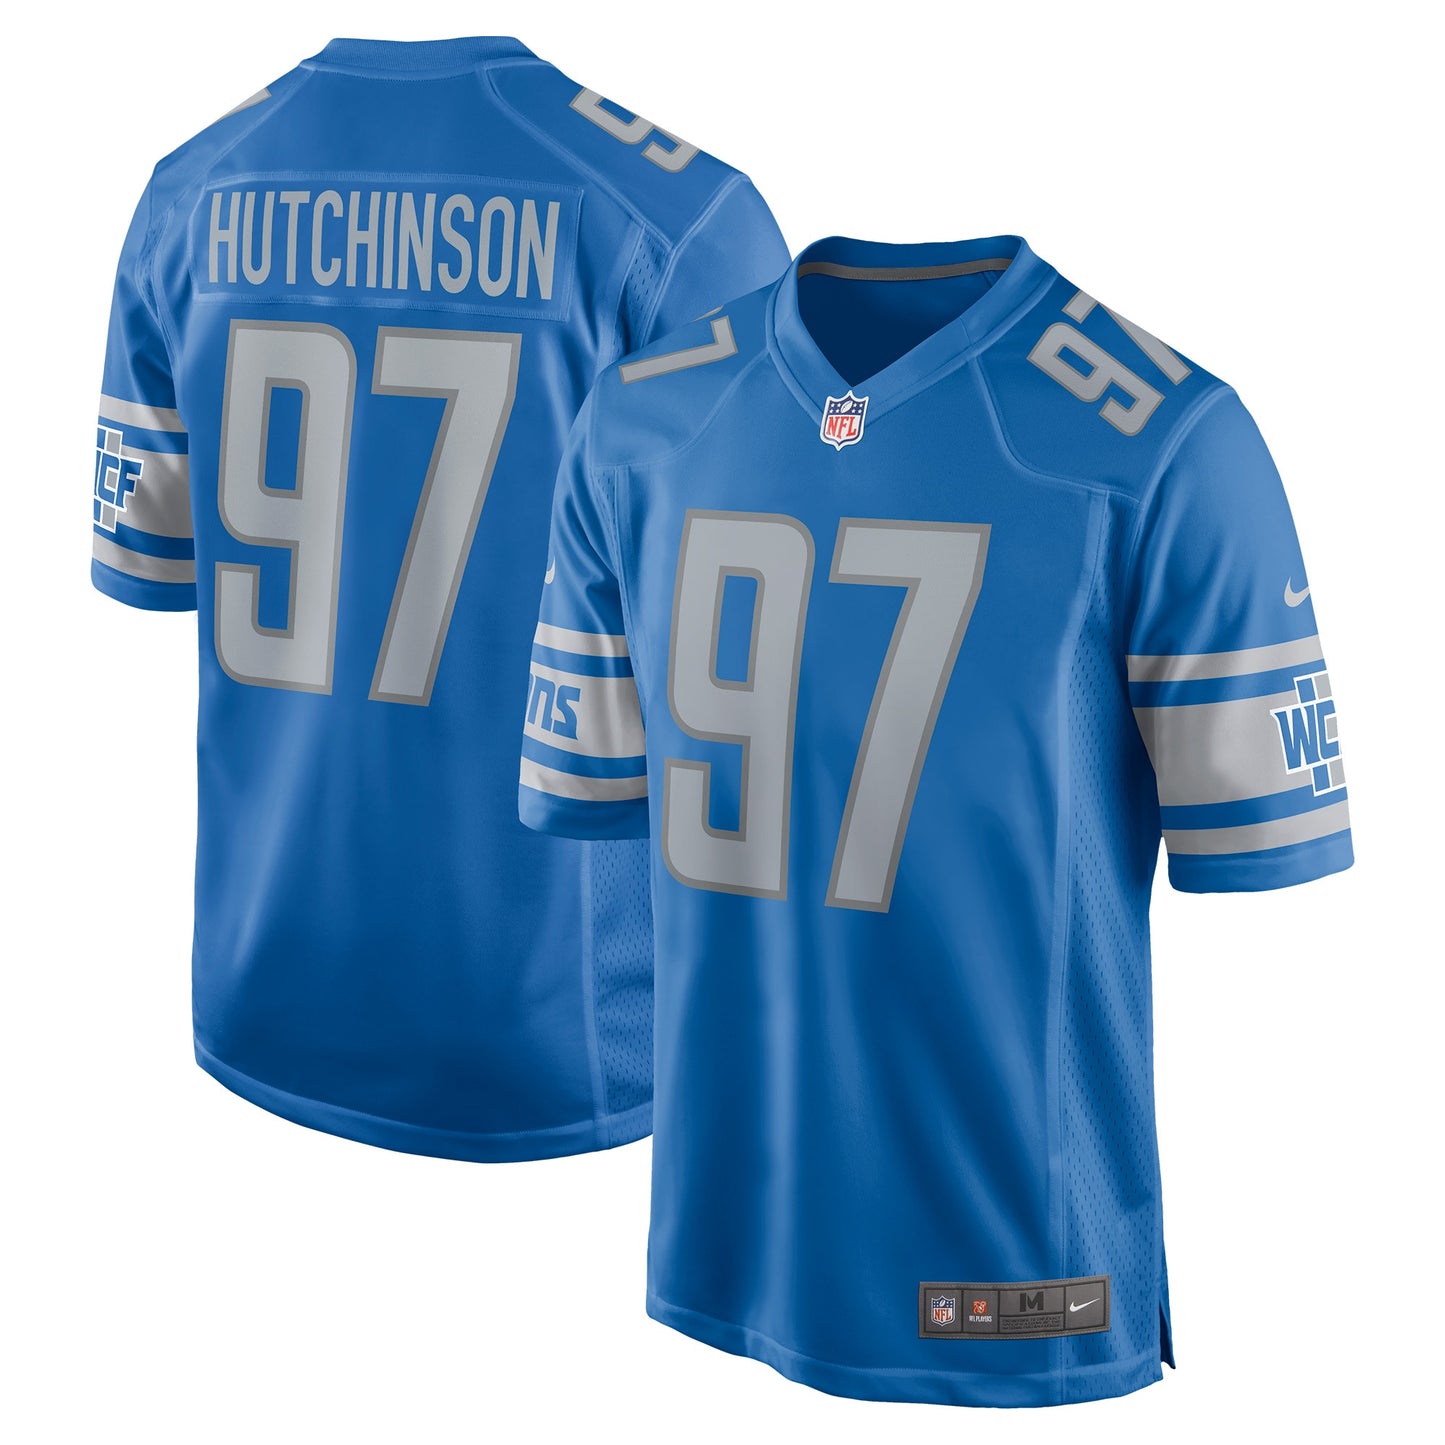 Aidan Hutchinson Detroit Lions Nike Youth Game Jersey - Blue